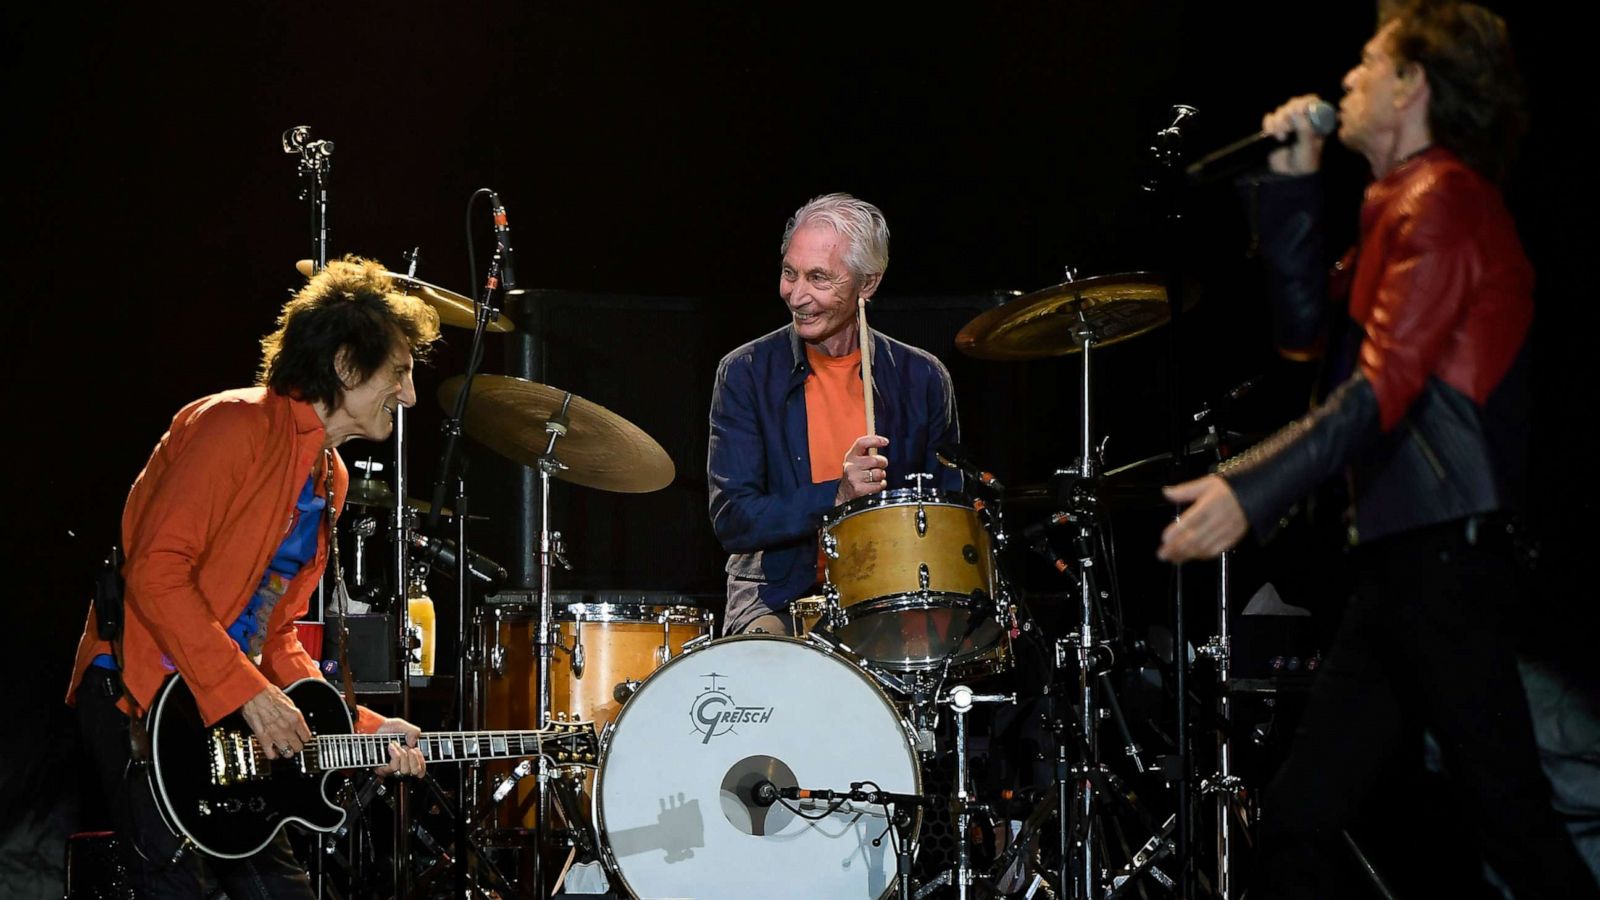 PHOTO: Charlie Watts of the Rolling Stones performs at Mile High Stadium on Aug. 10, 2019 in Denver.